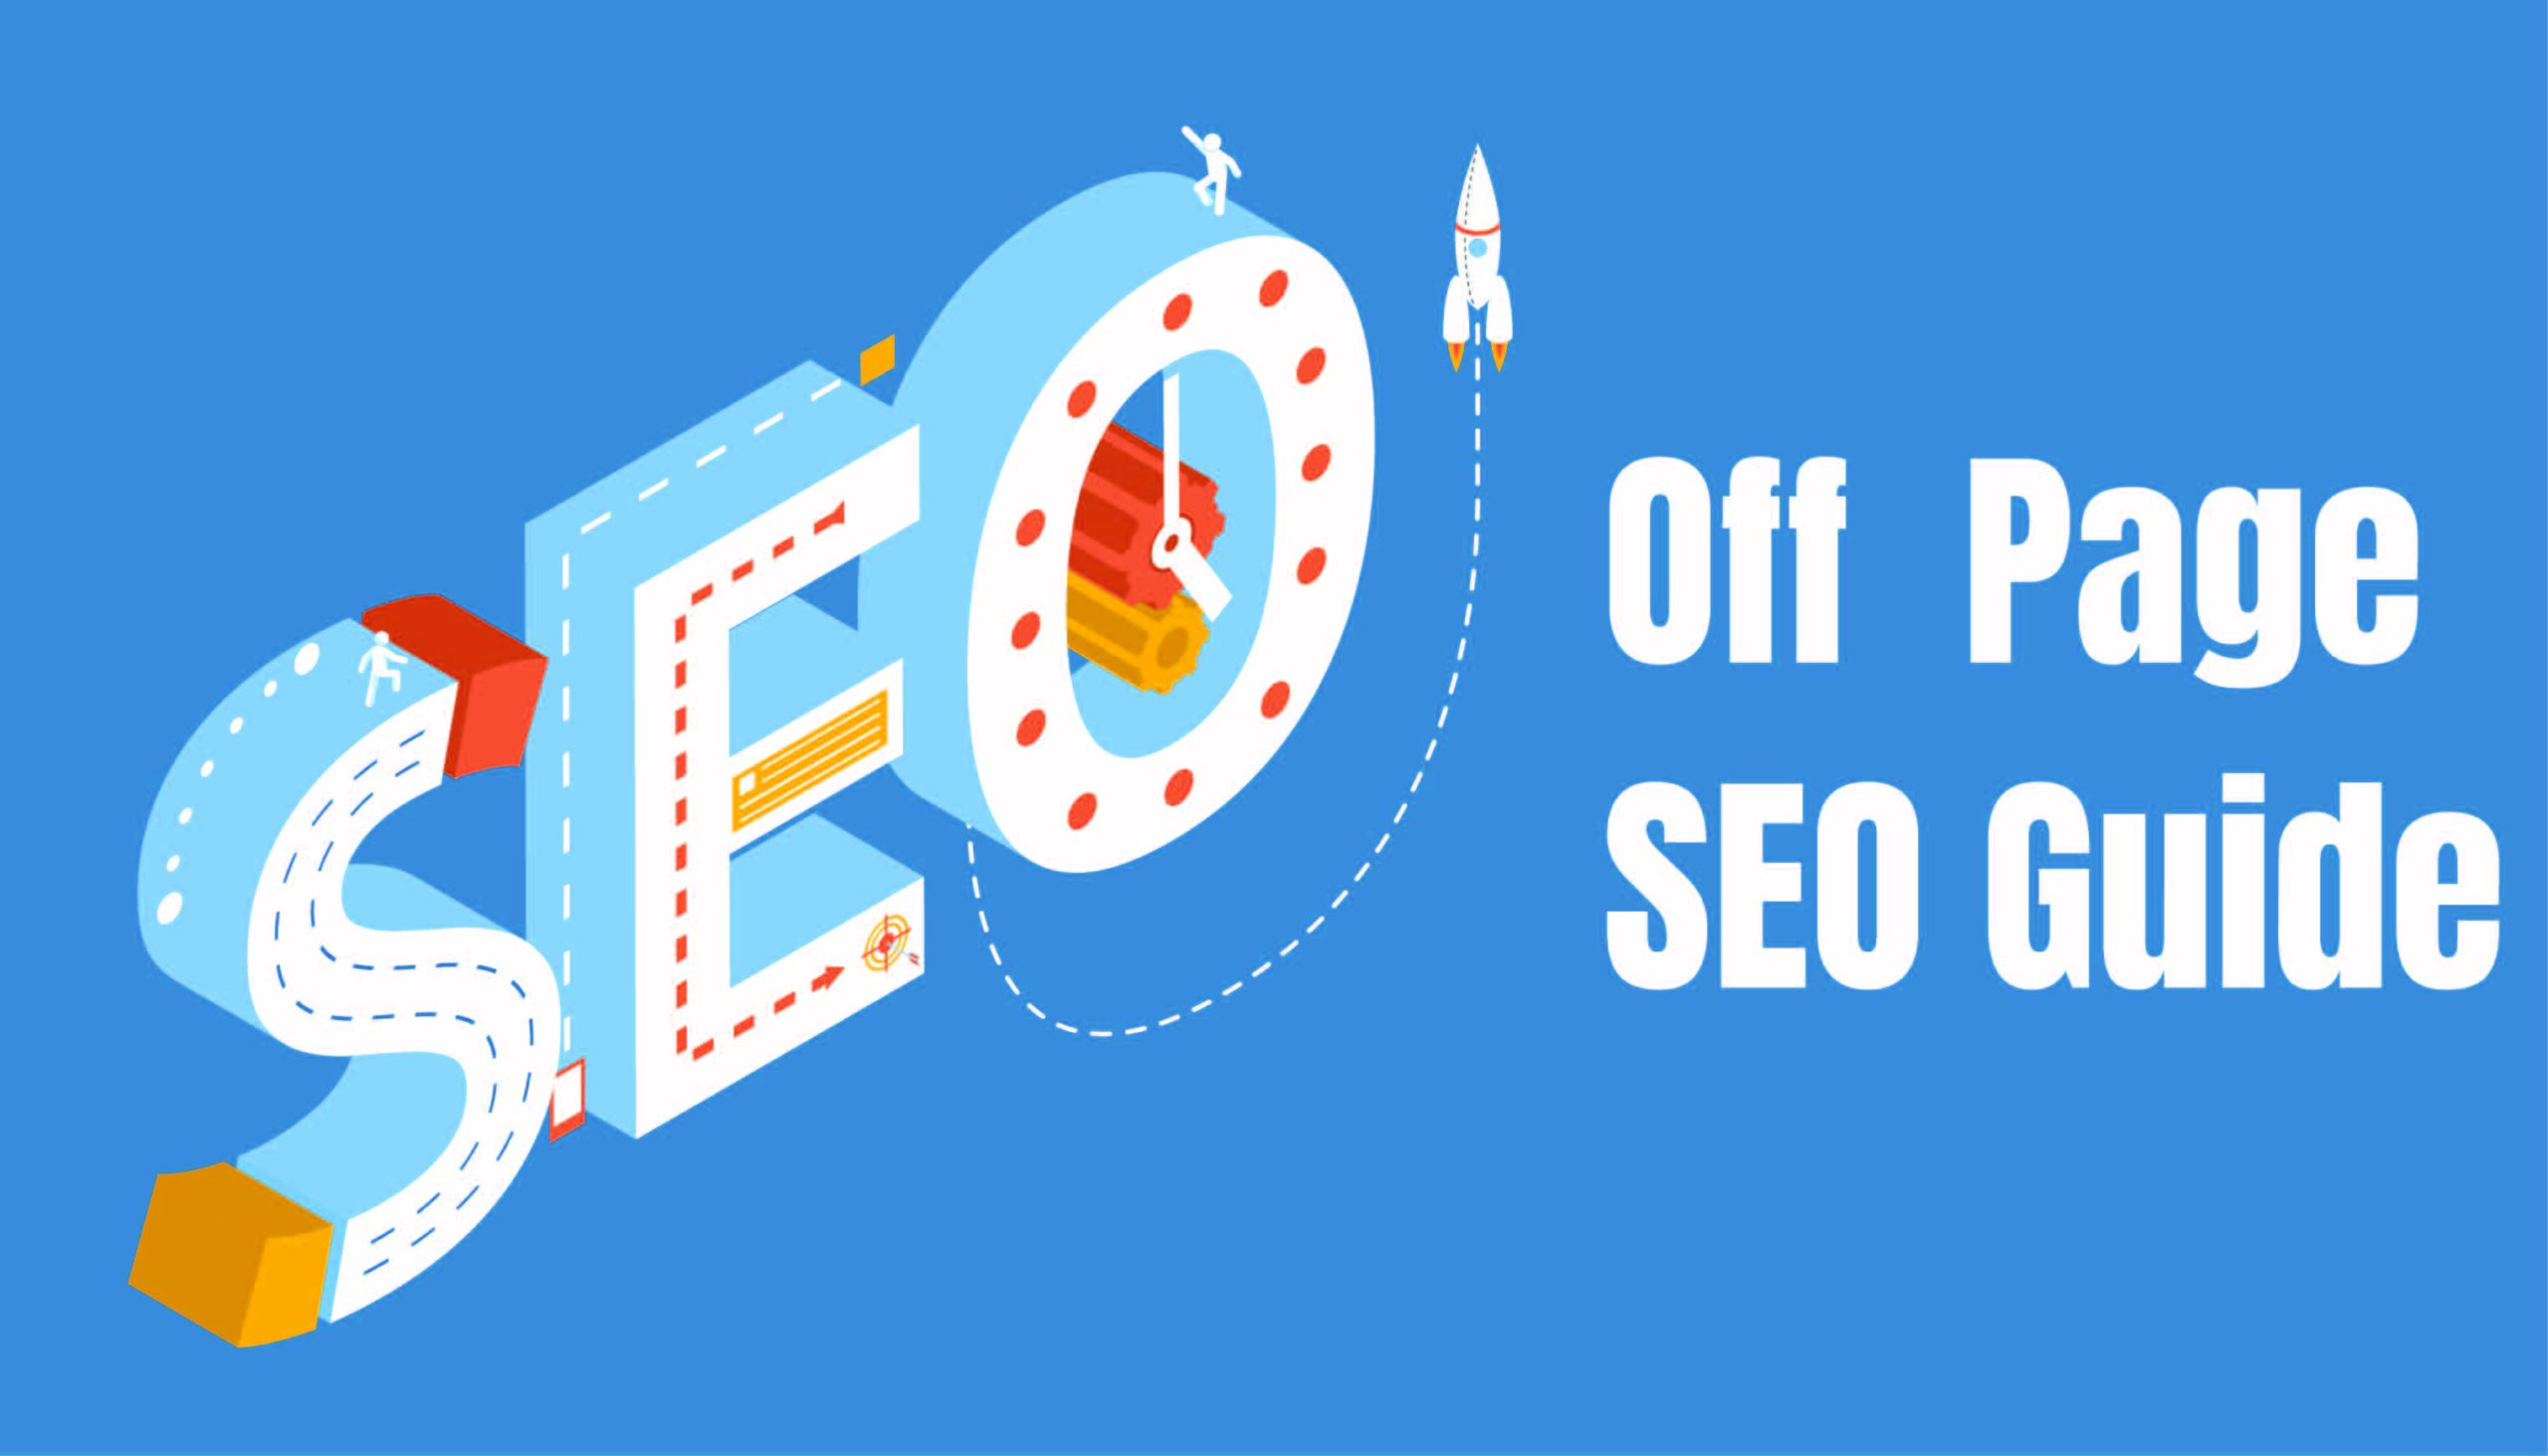 The Most Complete Guide to Off Page SEO That You Will Ever Read